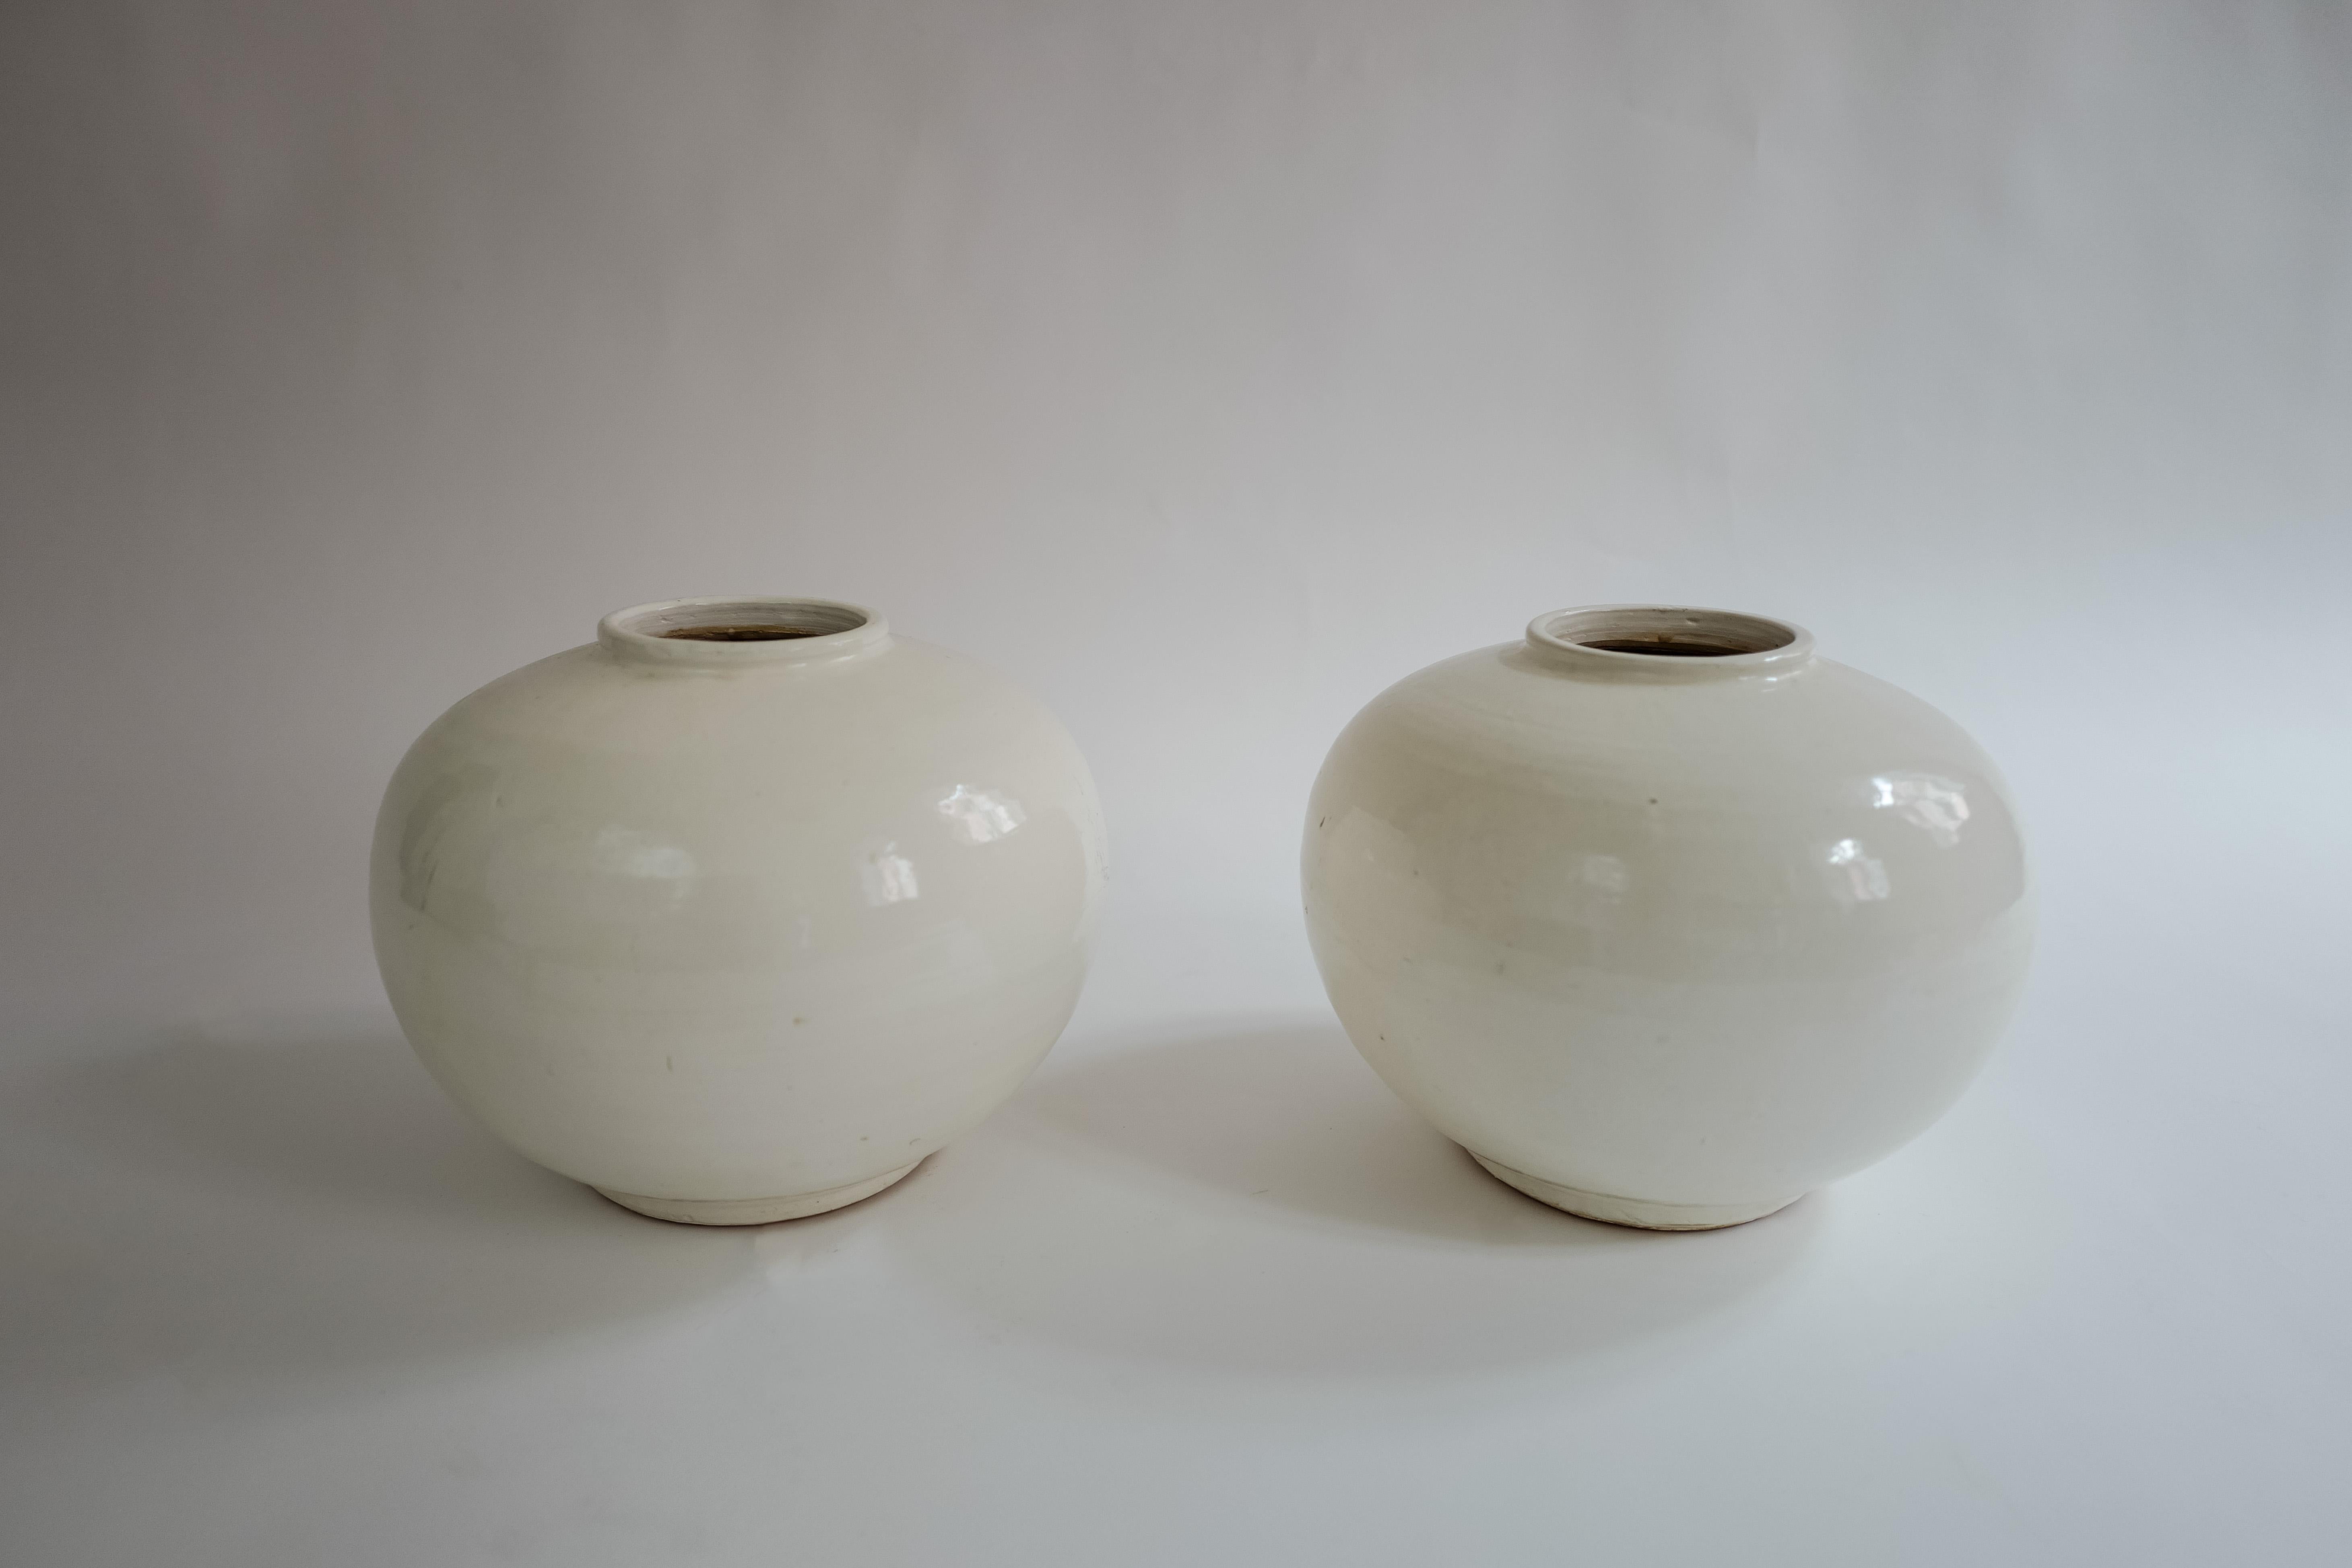 A pair of white ceramic Chinese vases circa early 20th century.